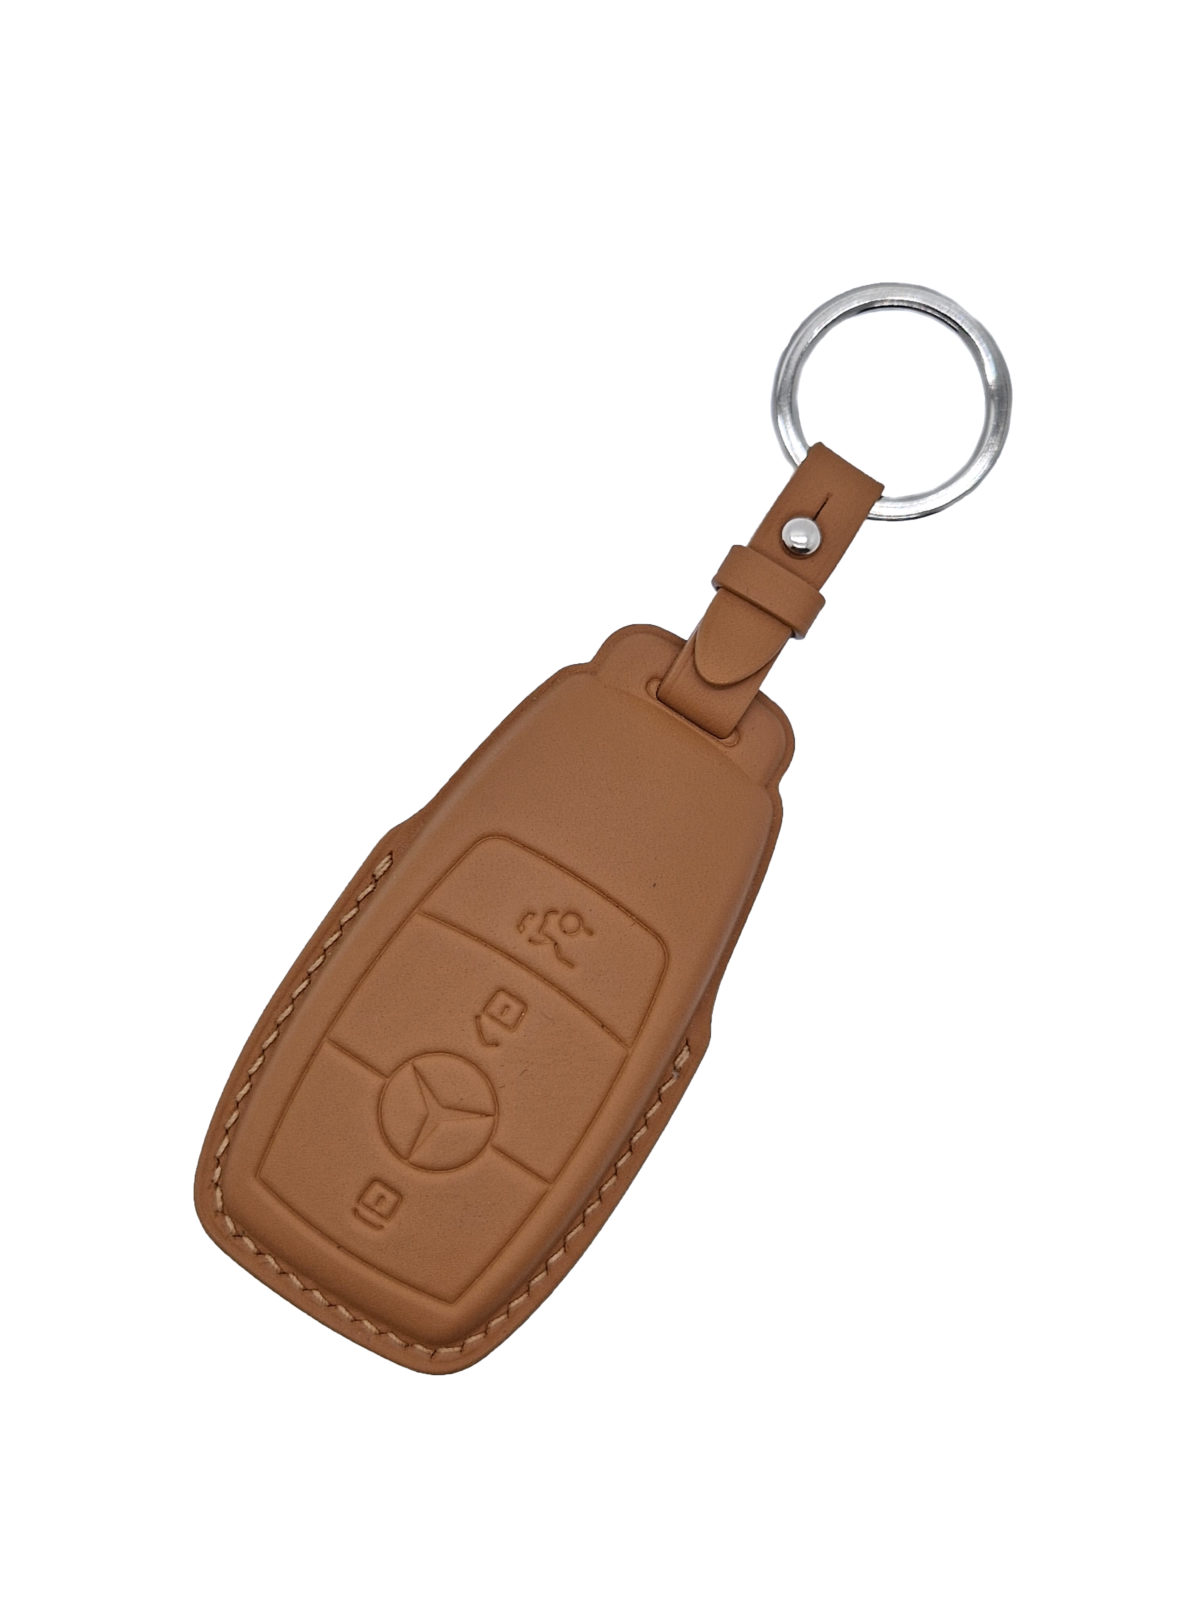 Mercedes-Benz leather key pouch